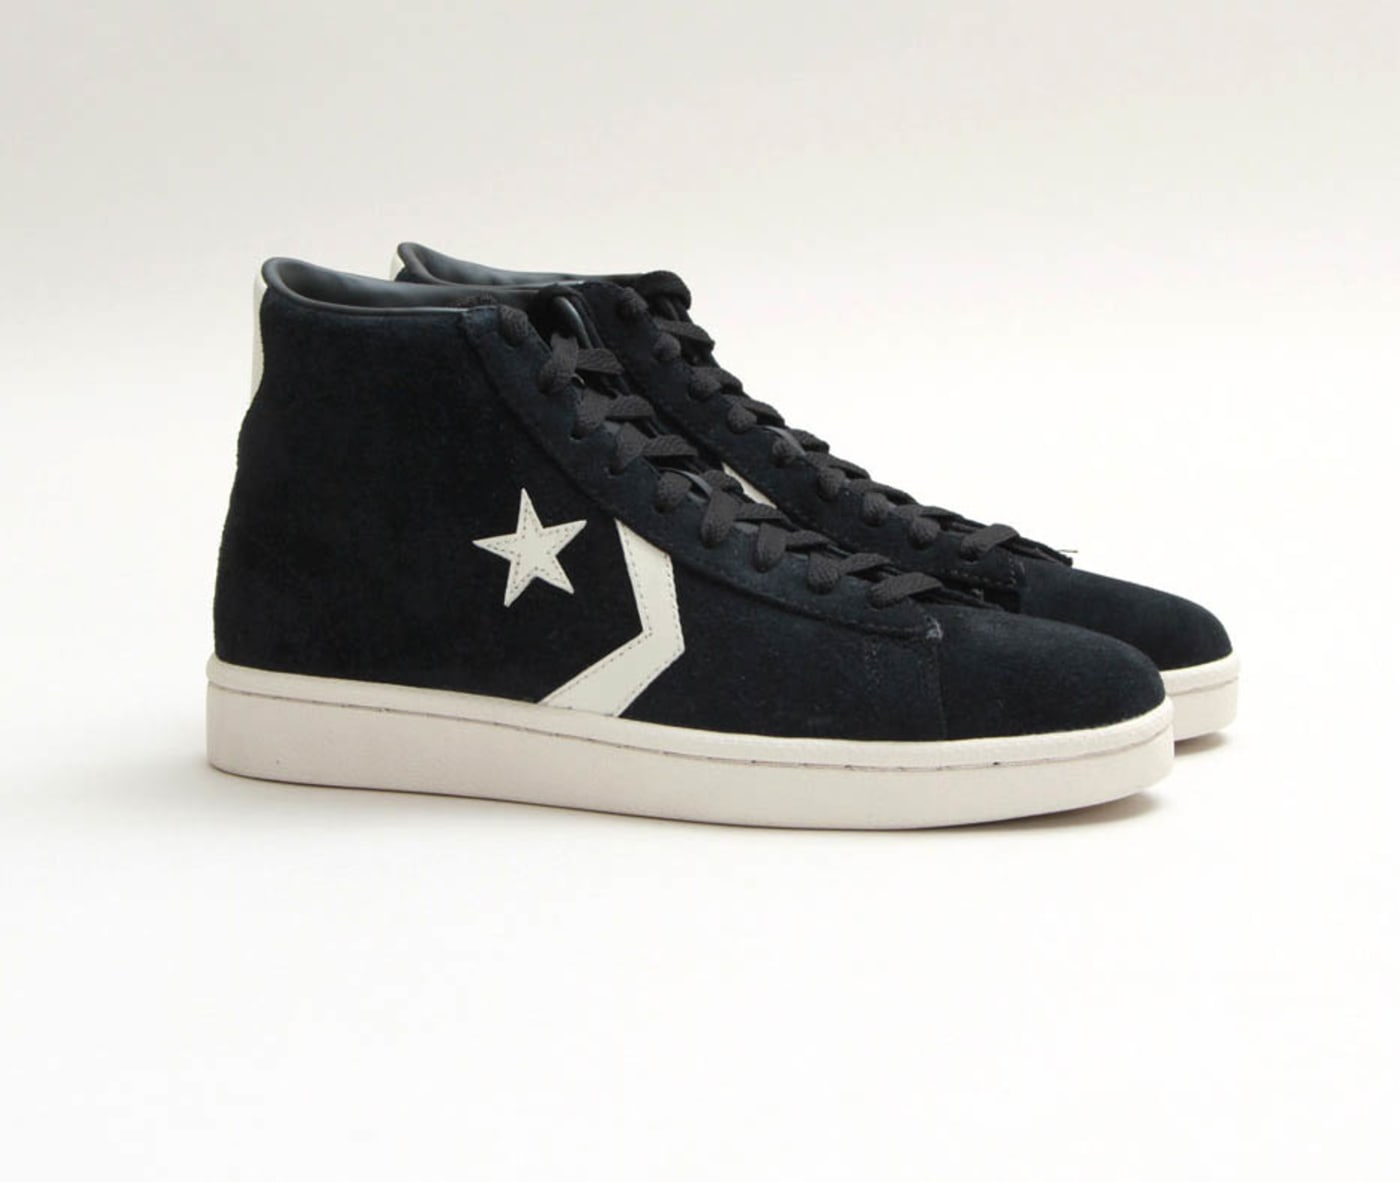 Kick Push in This Iconic Sneaker from Converse | Complex